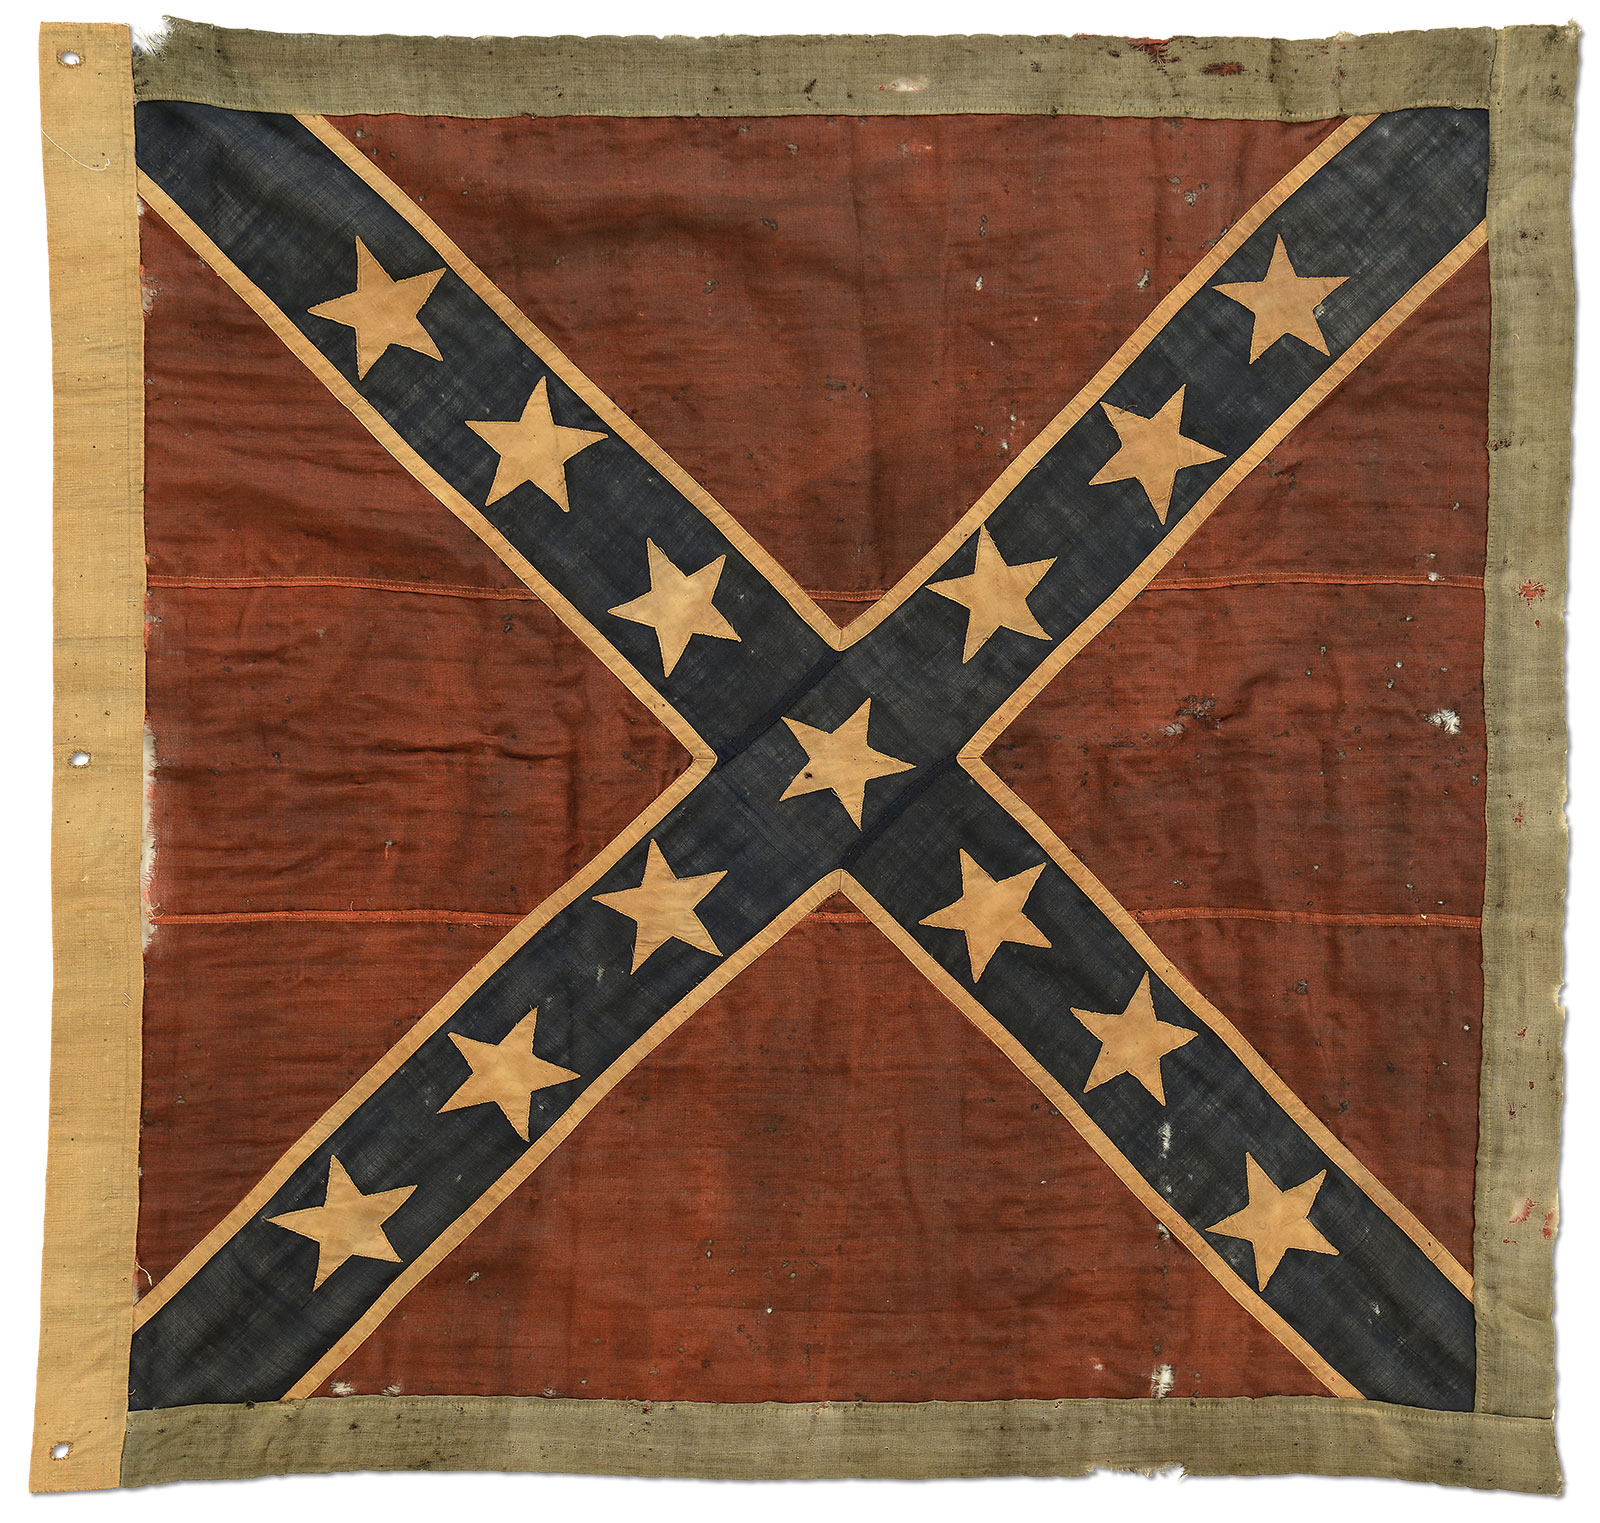 Fine & Historic Army of Northern Virginia Battle Flag carried by Tucker’s Naval Brigade at Battle of Sailor’s Creek, one of the last engagements of the Civil War, sold for $109,250.